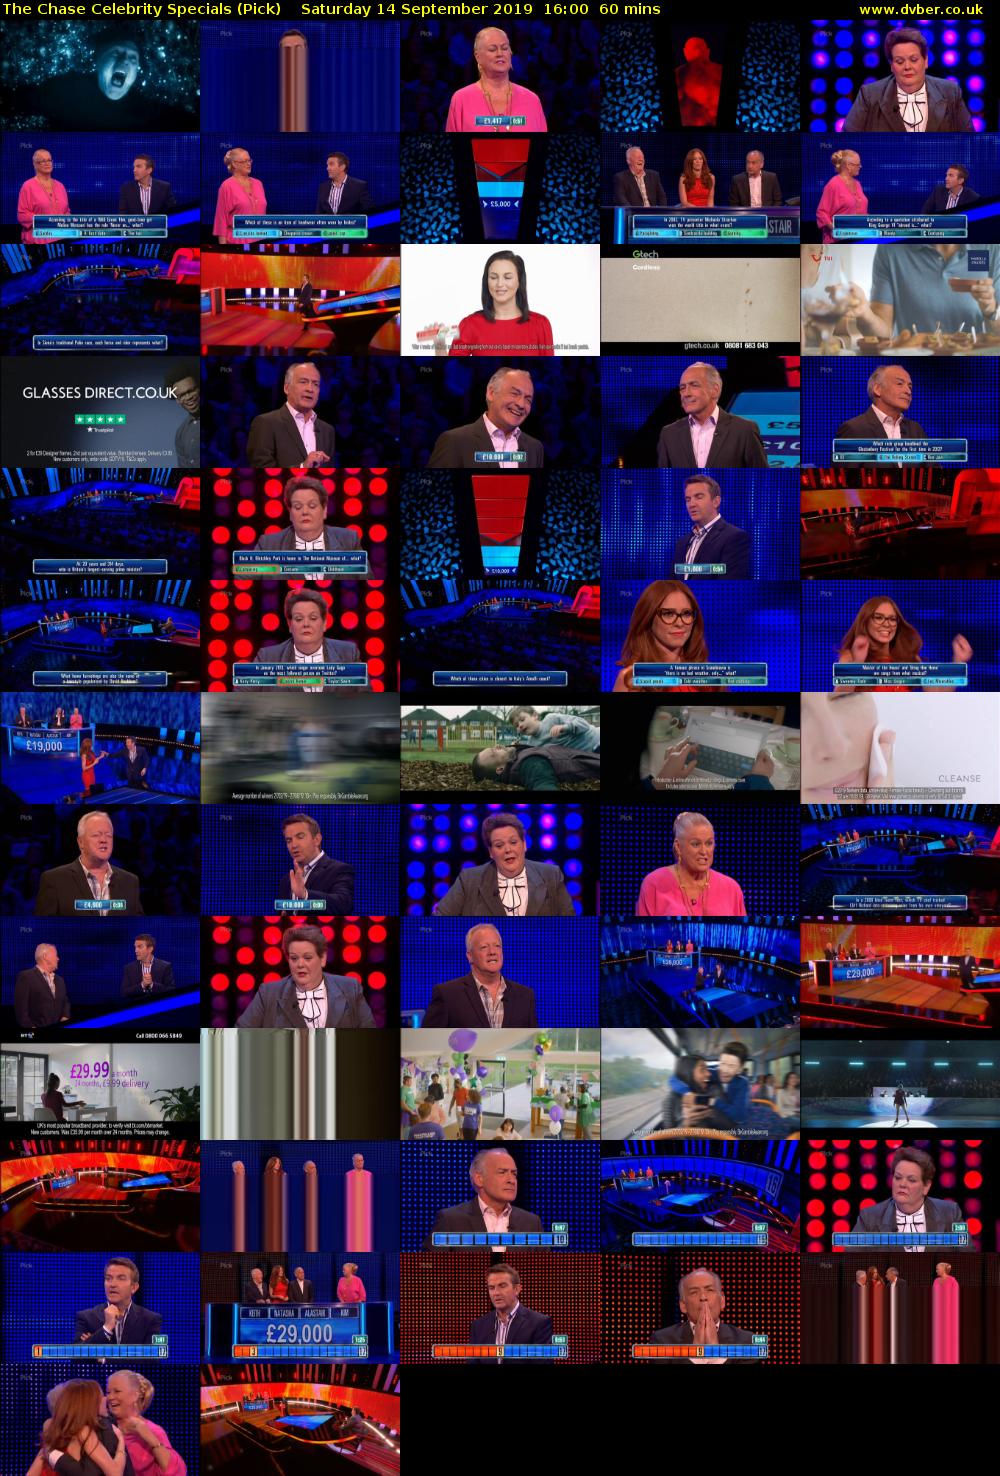 The Chase Celebrity Specials (Pick) Saturday 14 September 2019 16:00 - 17:00